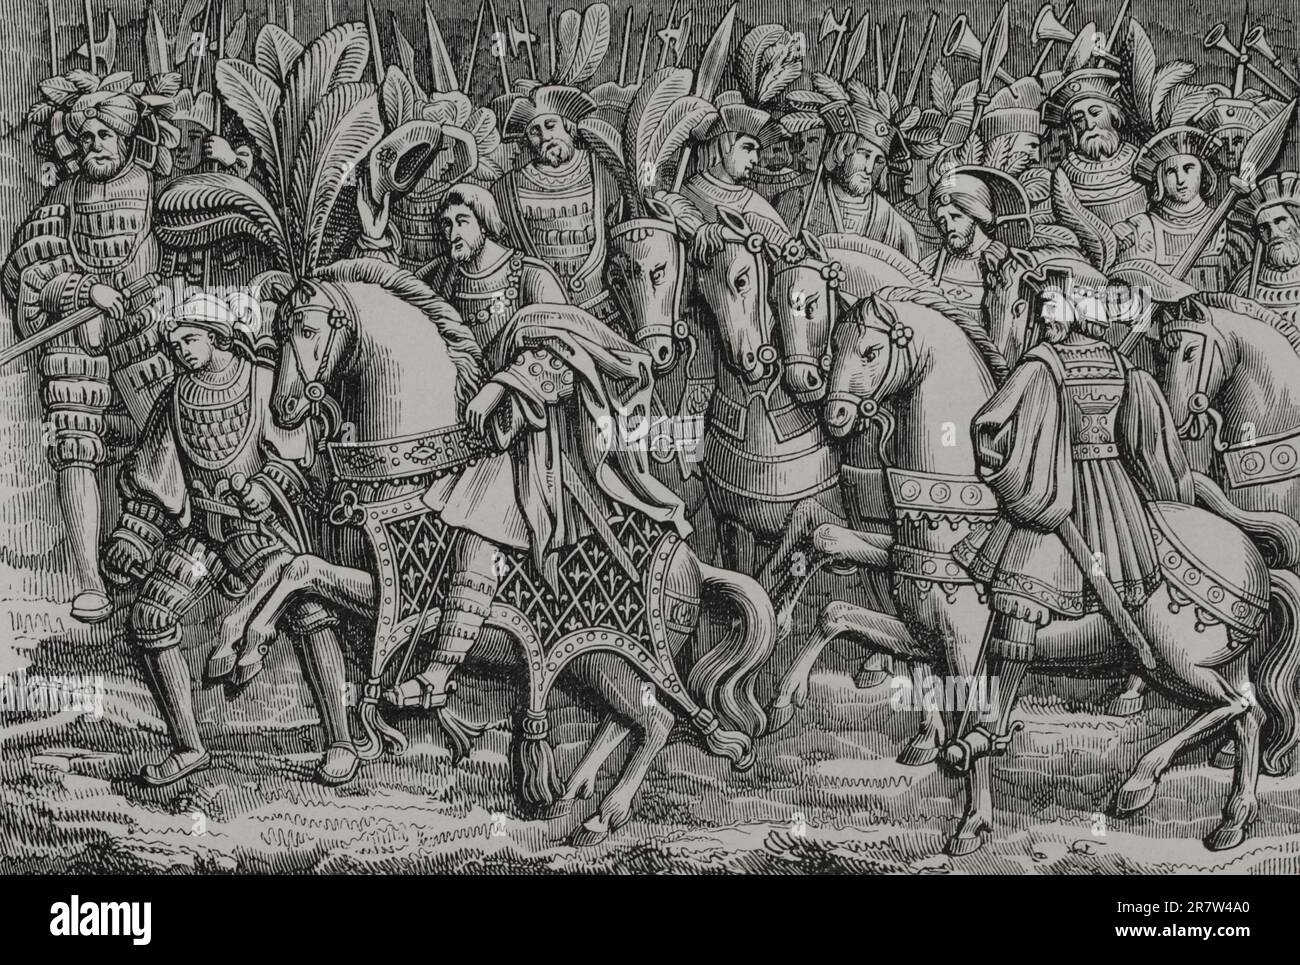 Meeting between King Henry VIII of England and King Francis I of France, on the Field of the Cloth of Gold, 7 June 1520. Engraving after an existing bas-relief in the Hôtel de Bourgtheroulde, Rouen (France). 'Les Arts au Moyen Age et a l'Epoque de la Renaissance', by Paul Lacroix. Paris, 1877. Stock Photo